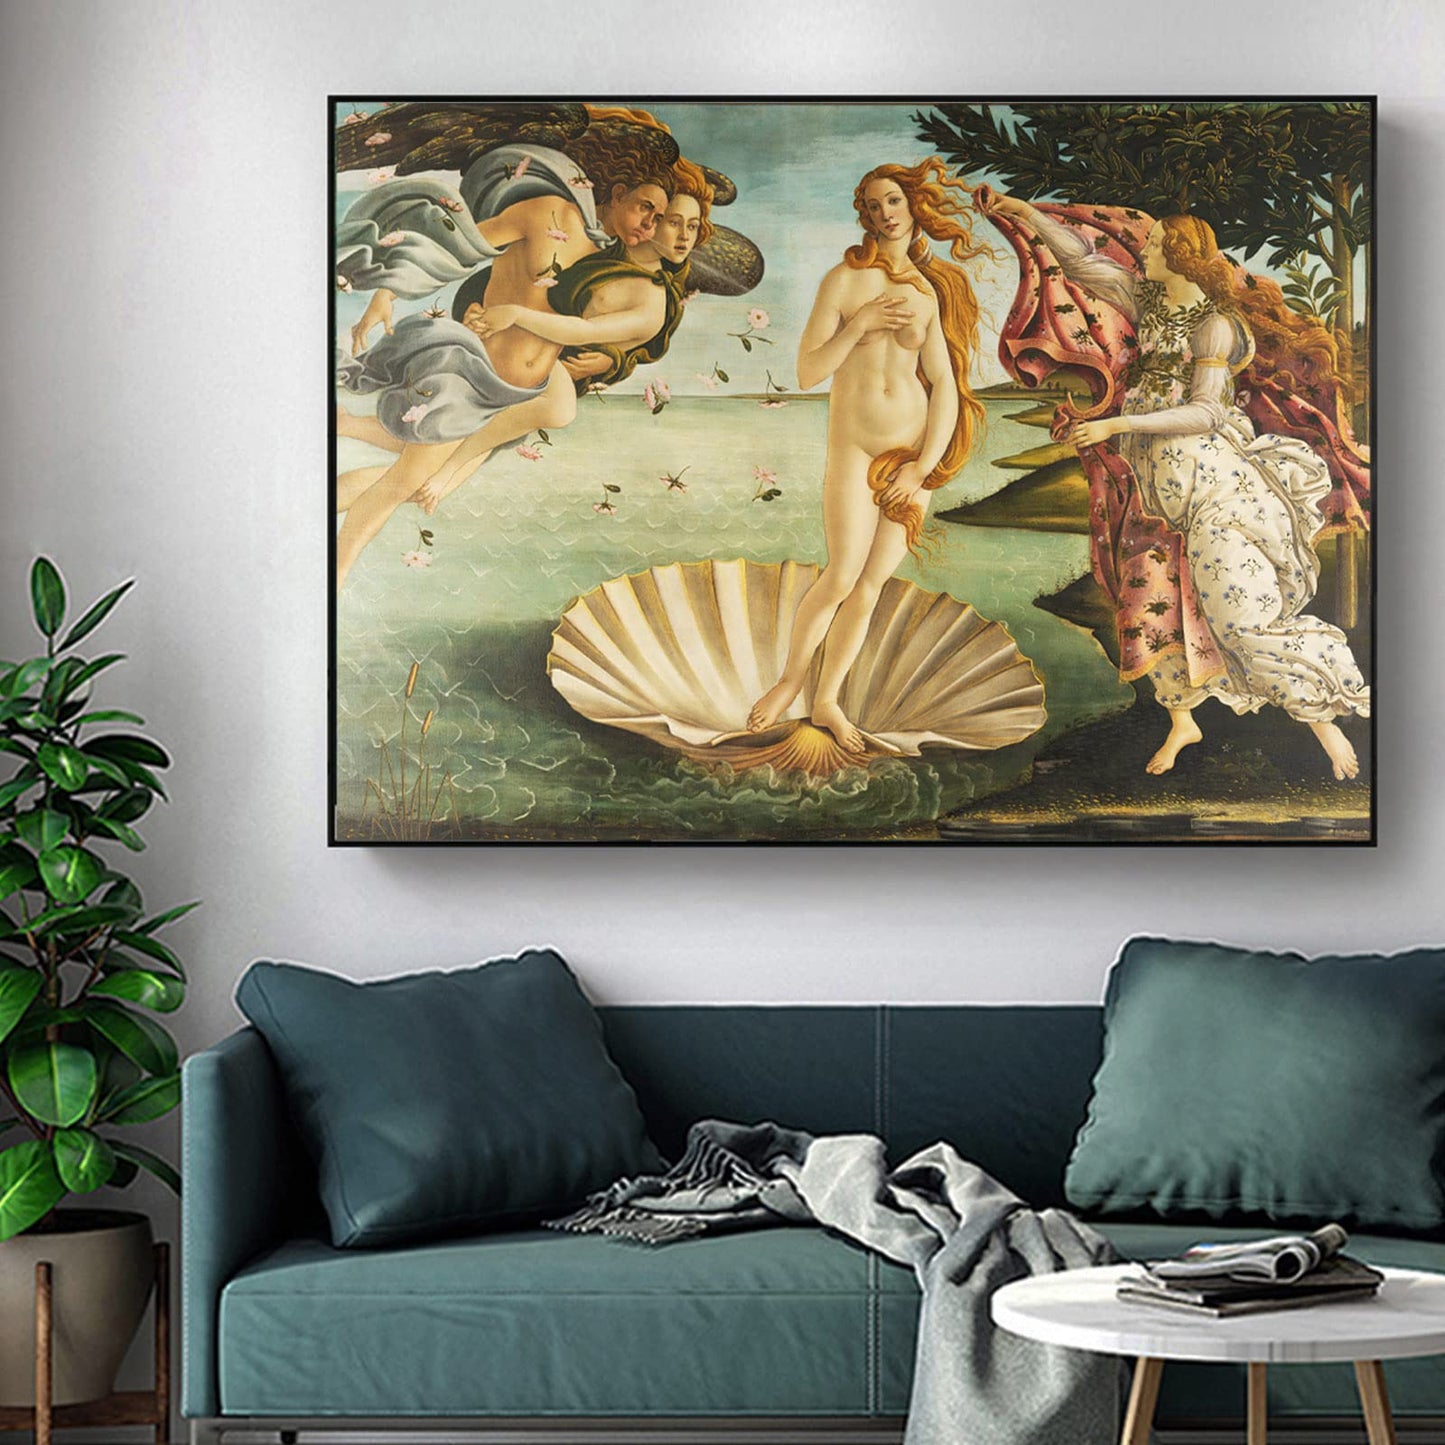 ZZPT Sandro Botticelli Wall Art Print - The Birth of Venus Poster - Abstract Painting Modern Canvas Art Wall Decor for Living Room Bedroom Home Decor Unframed (12x18in/30x45cm)